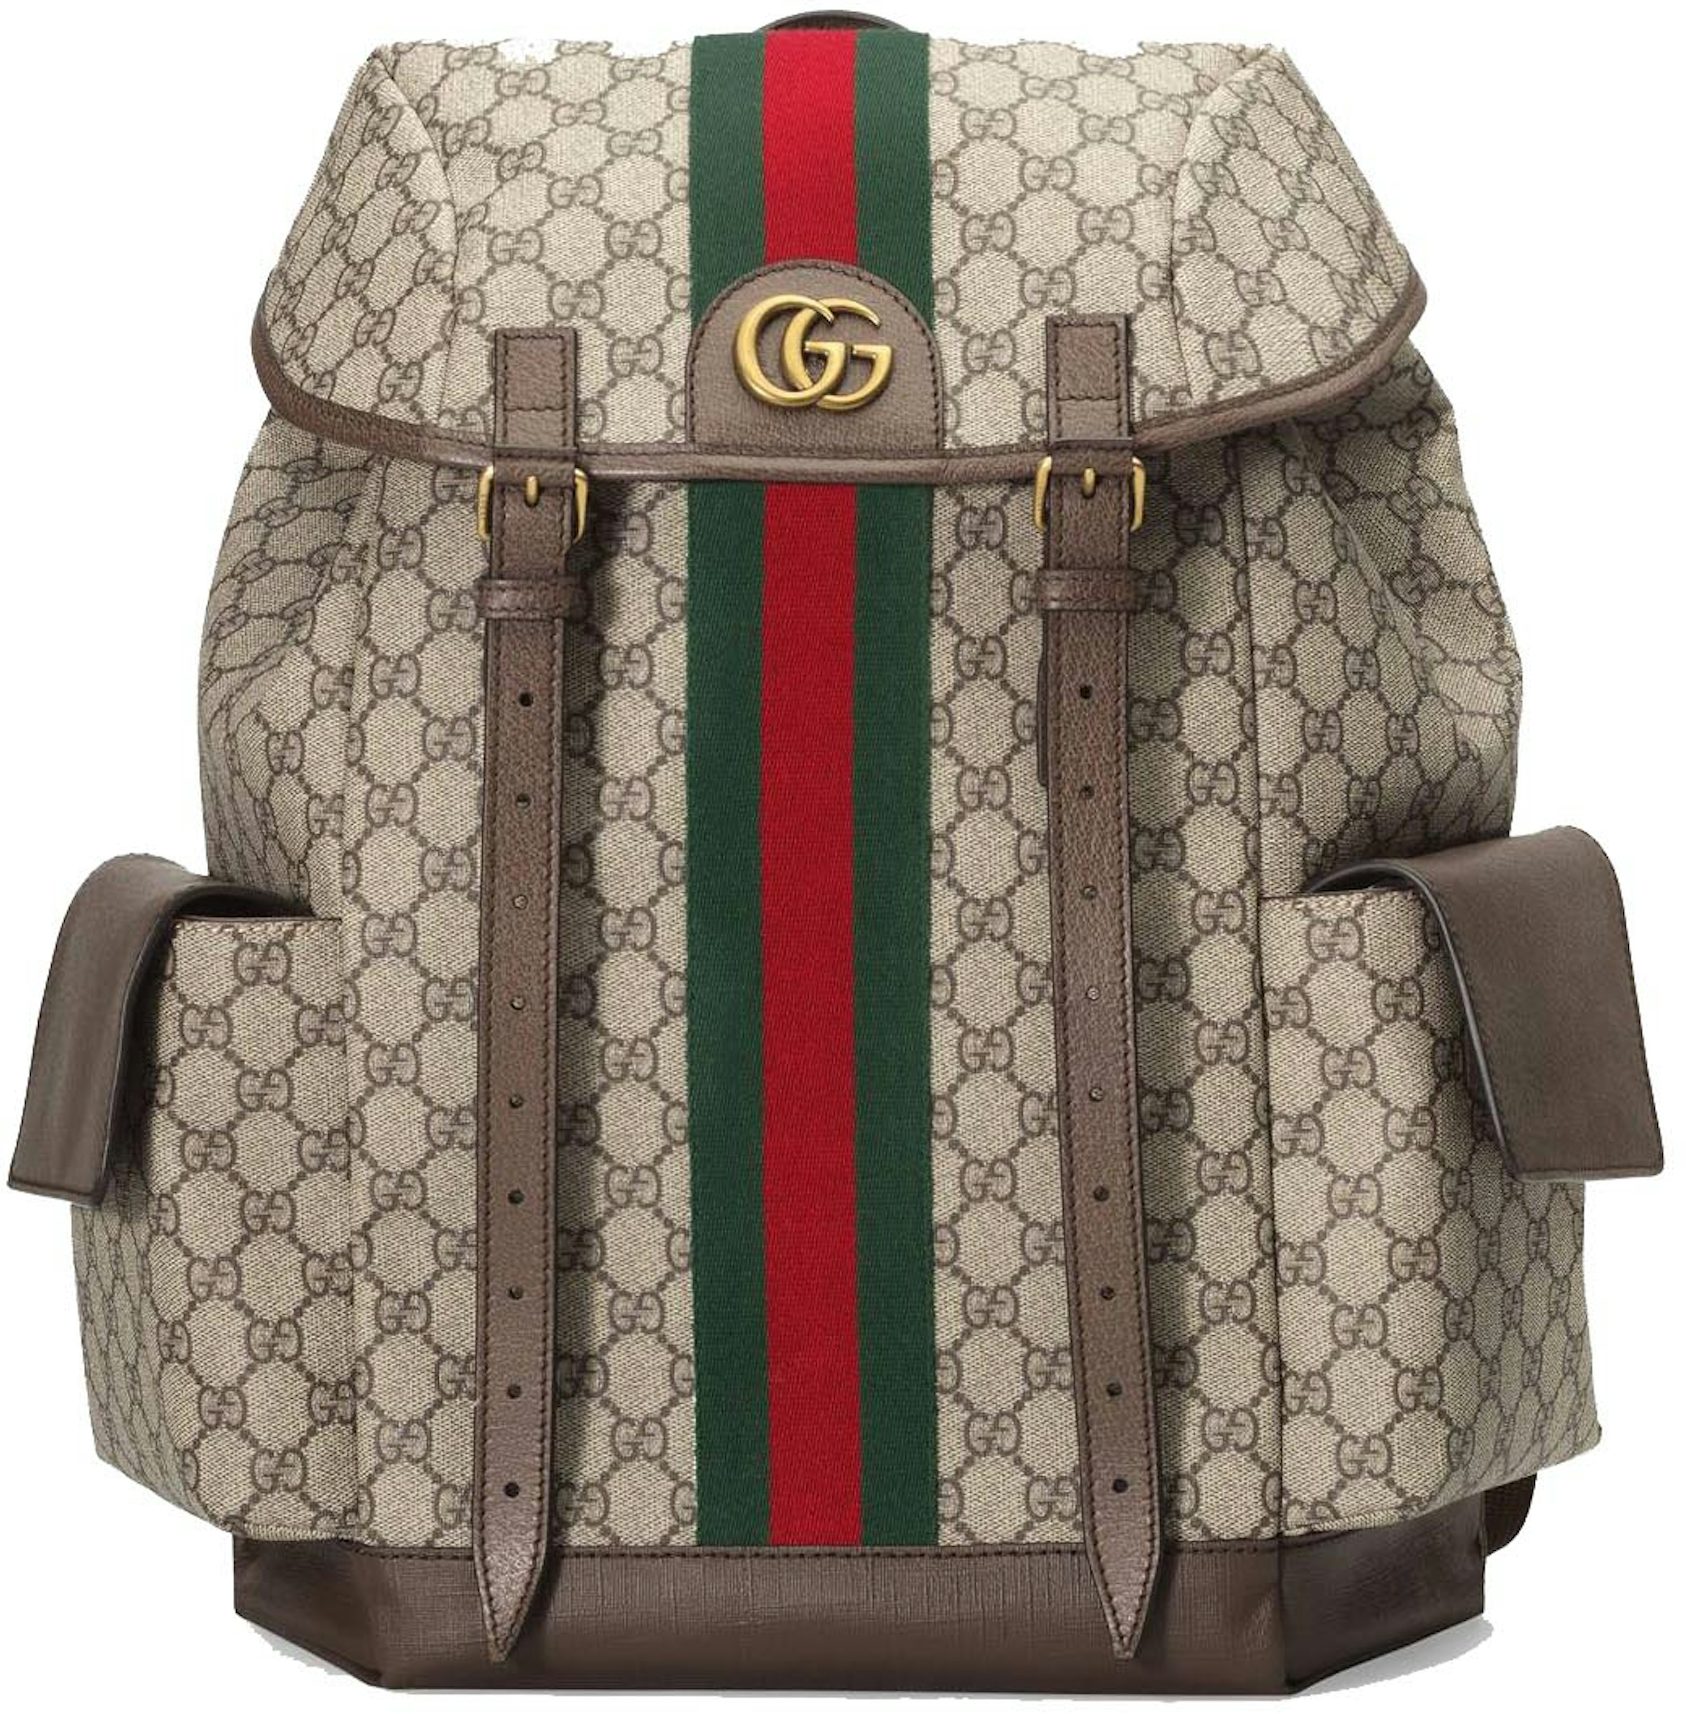 Jumbo GG backpack in camel and ebony GG canvas